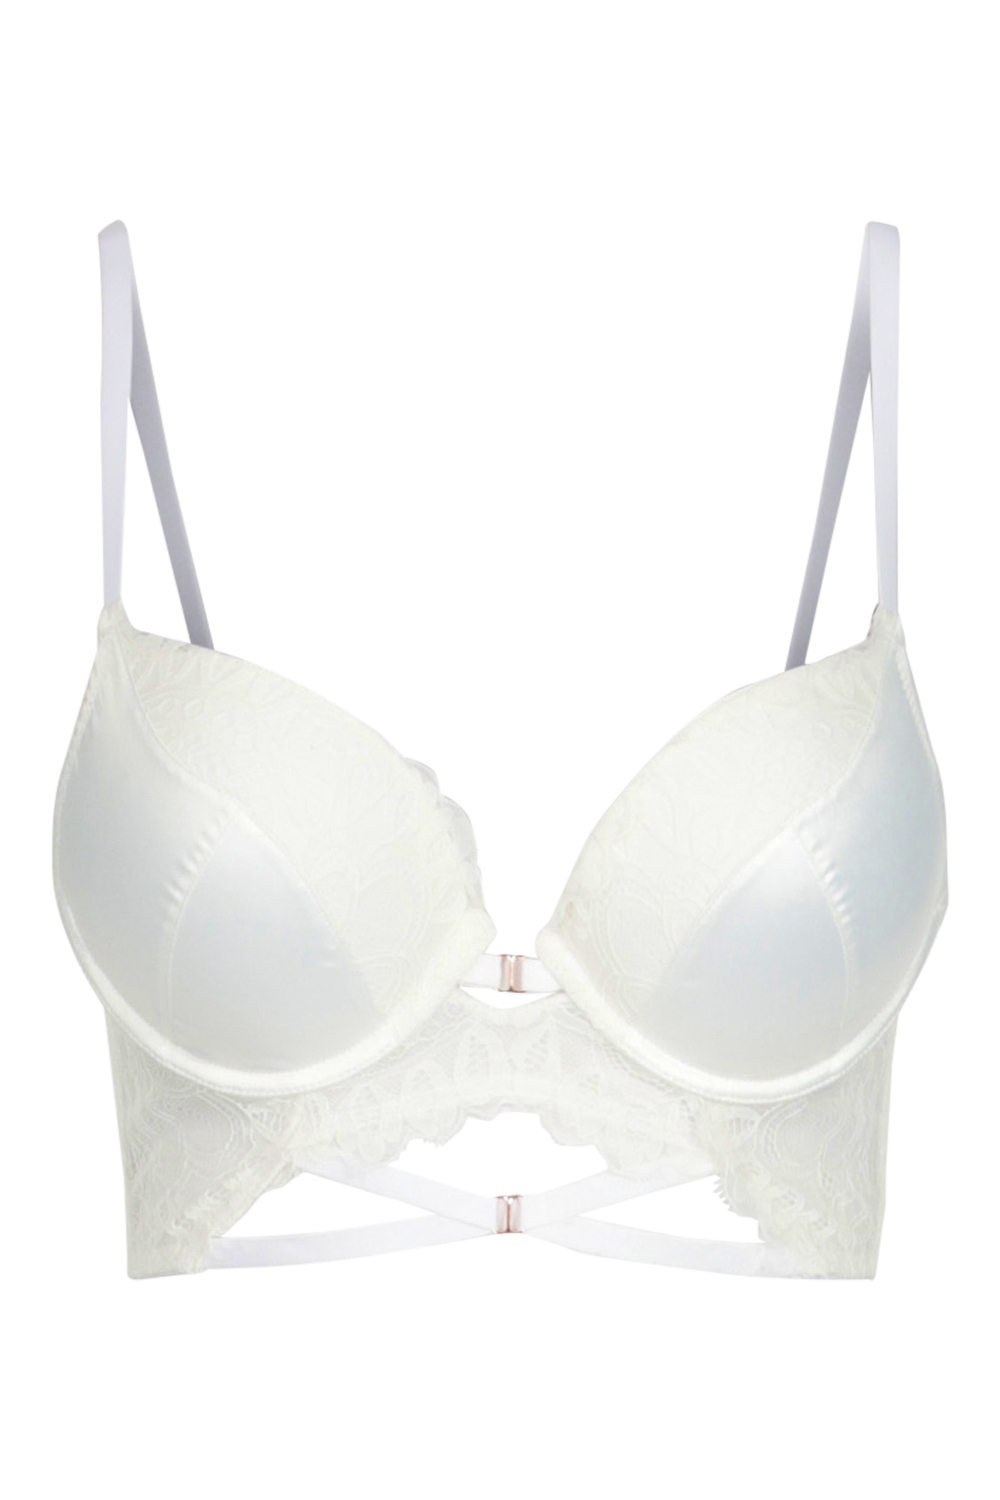 Satin and Lace Super Push Up Bra